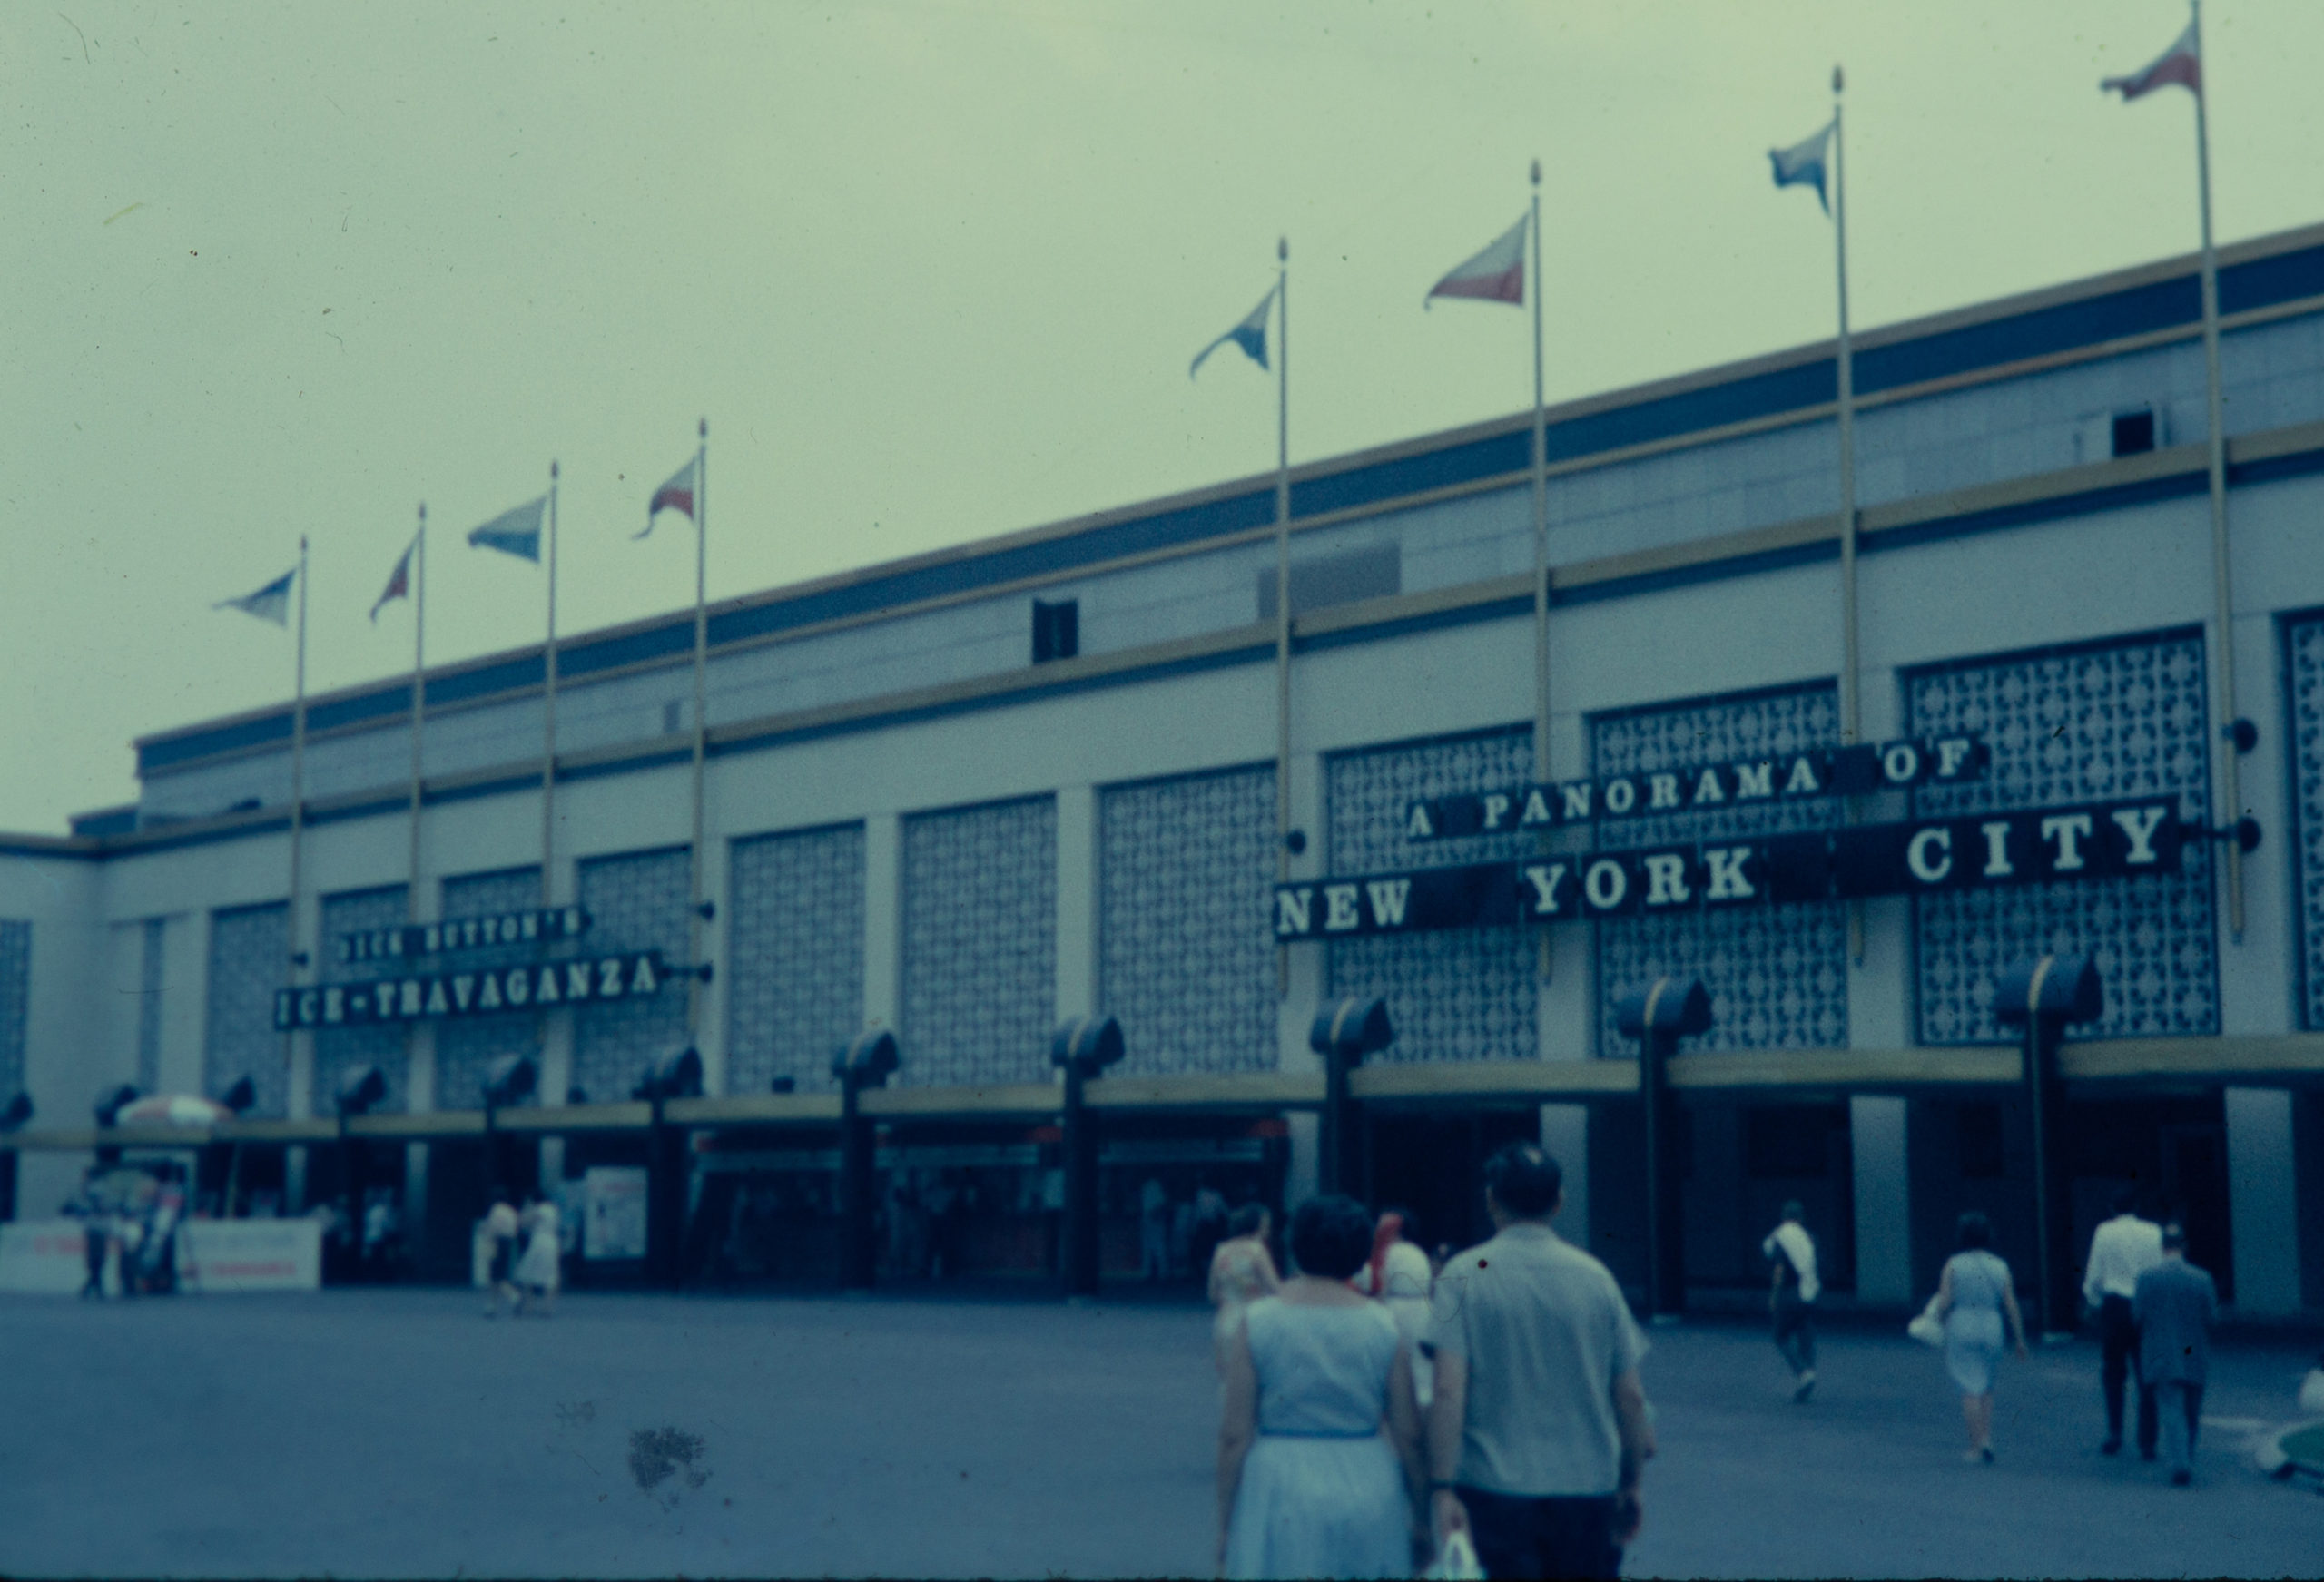 A dim, colored film photo of the New York City Building. Adults are dispersed in the walkway in front of the building. The building is lined with flags and there are partial views of the building’s signs. The one on the left reads “A PANORAMA OF NEW YORK CITY” in uppercase font.